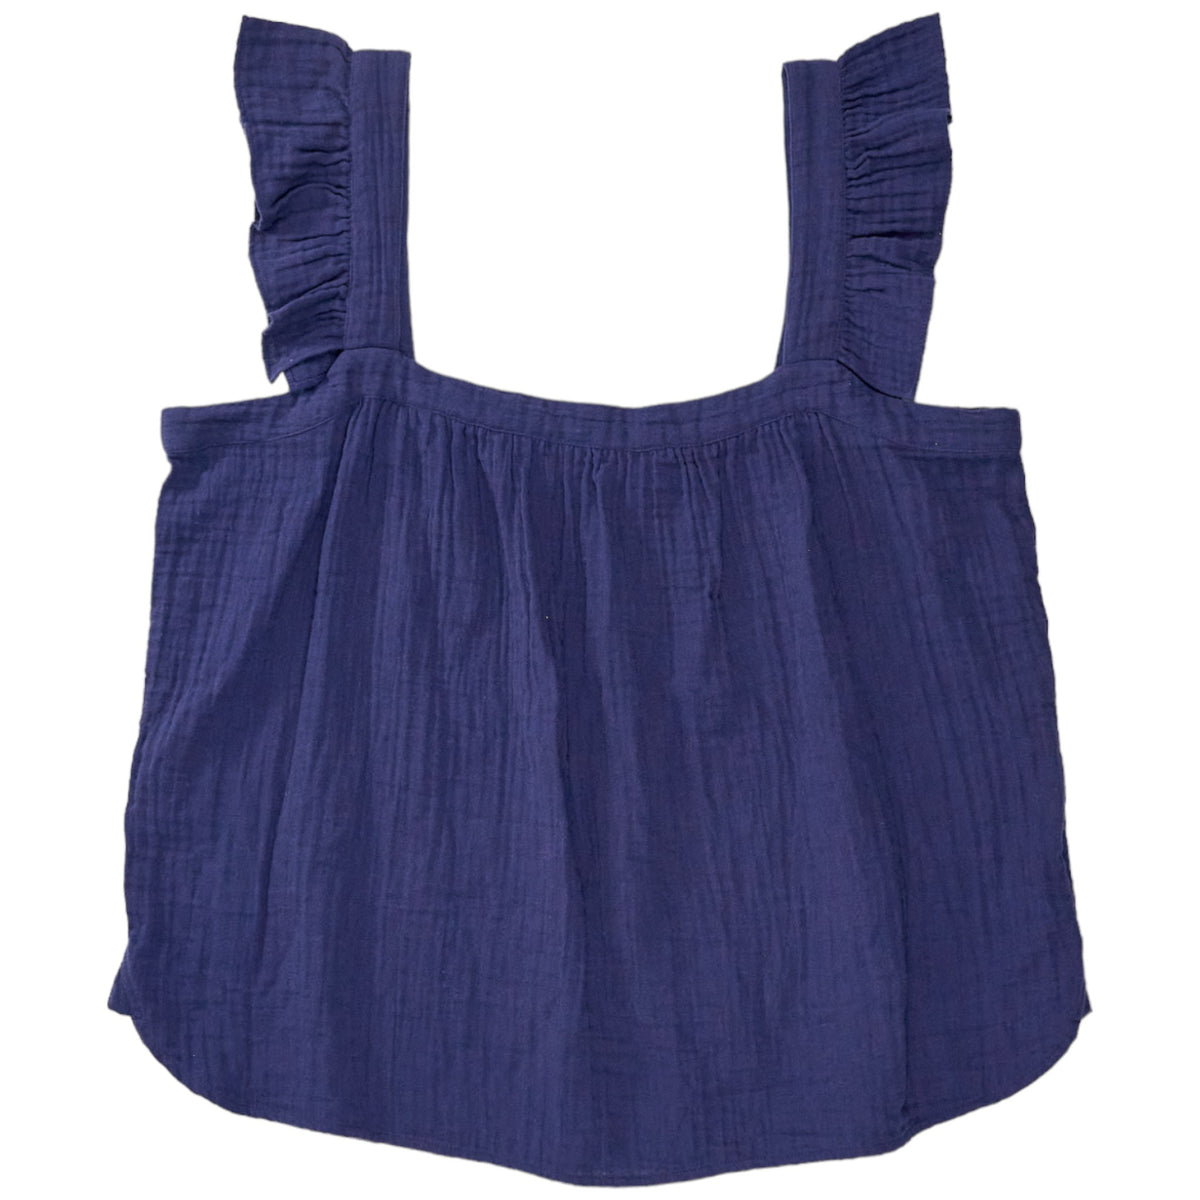 NRBY Blue Crinkle Cotton Top